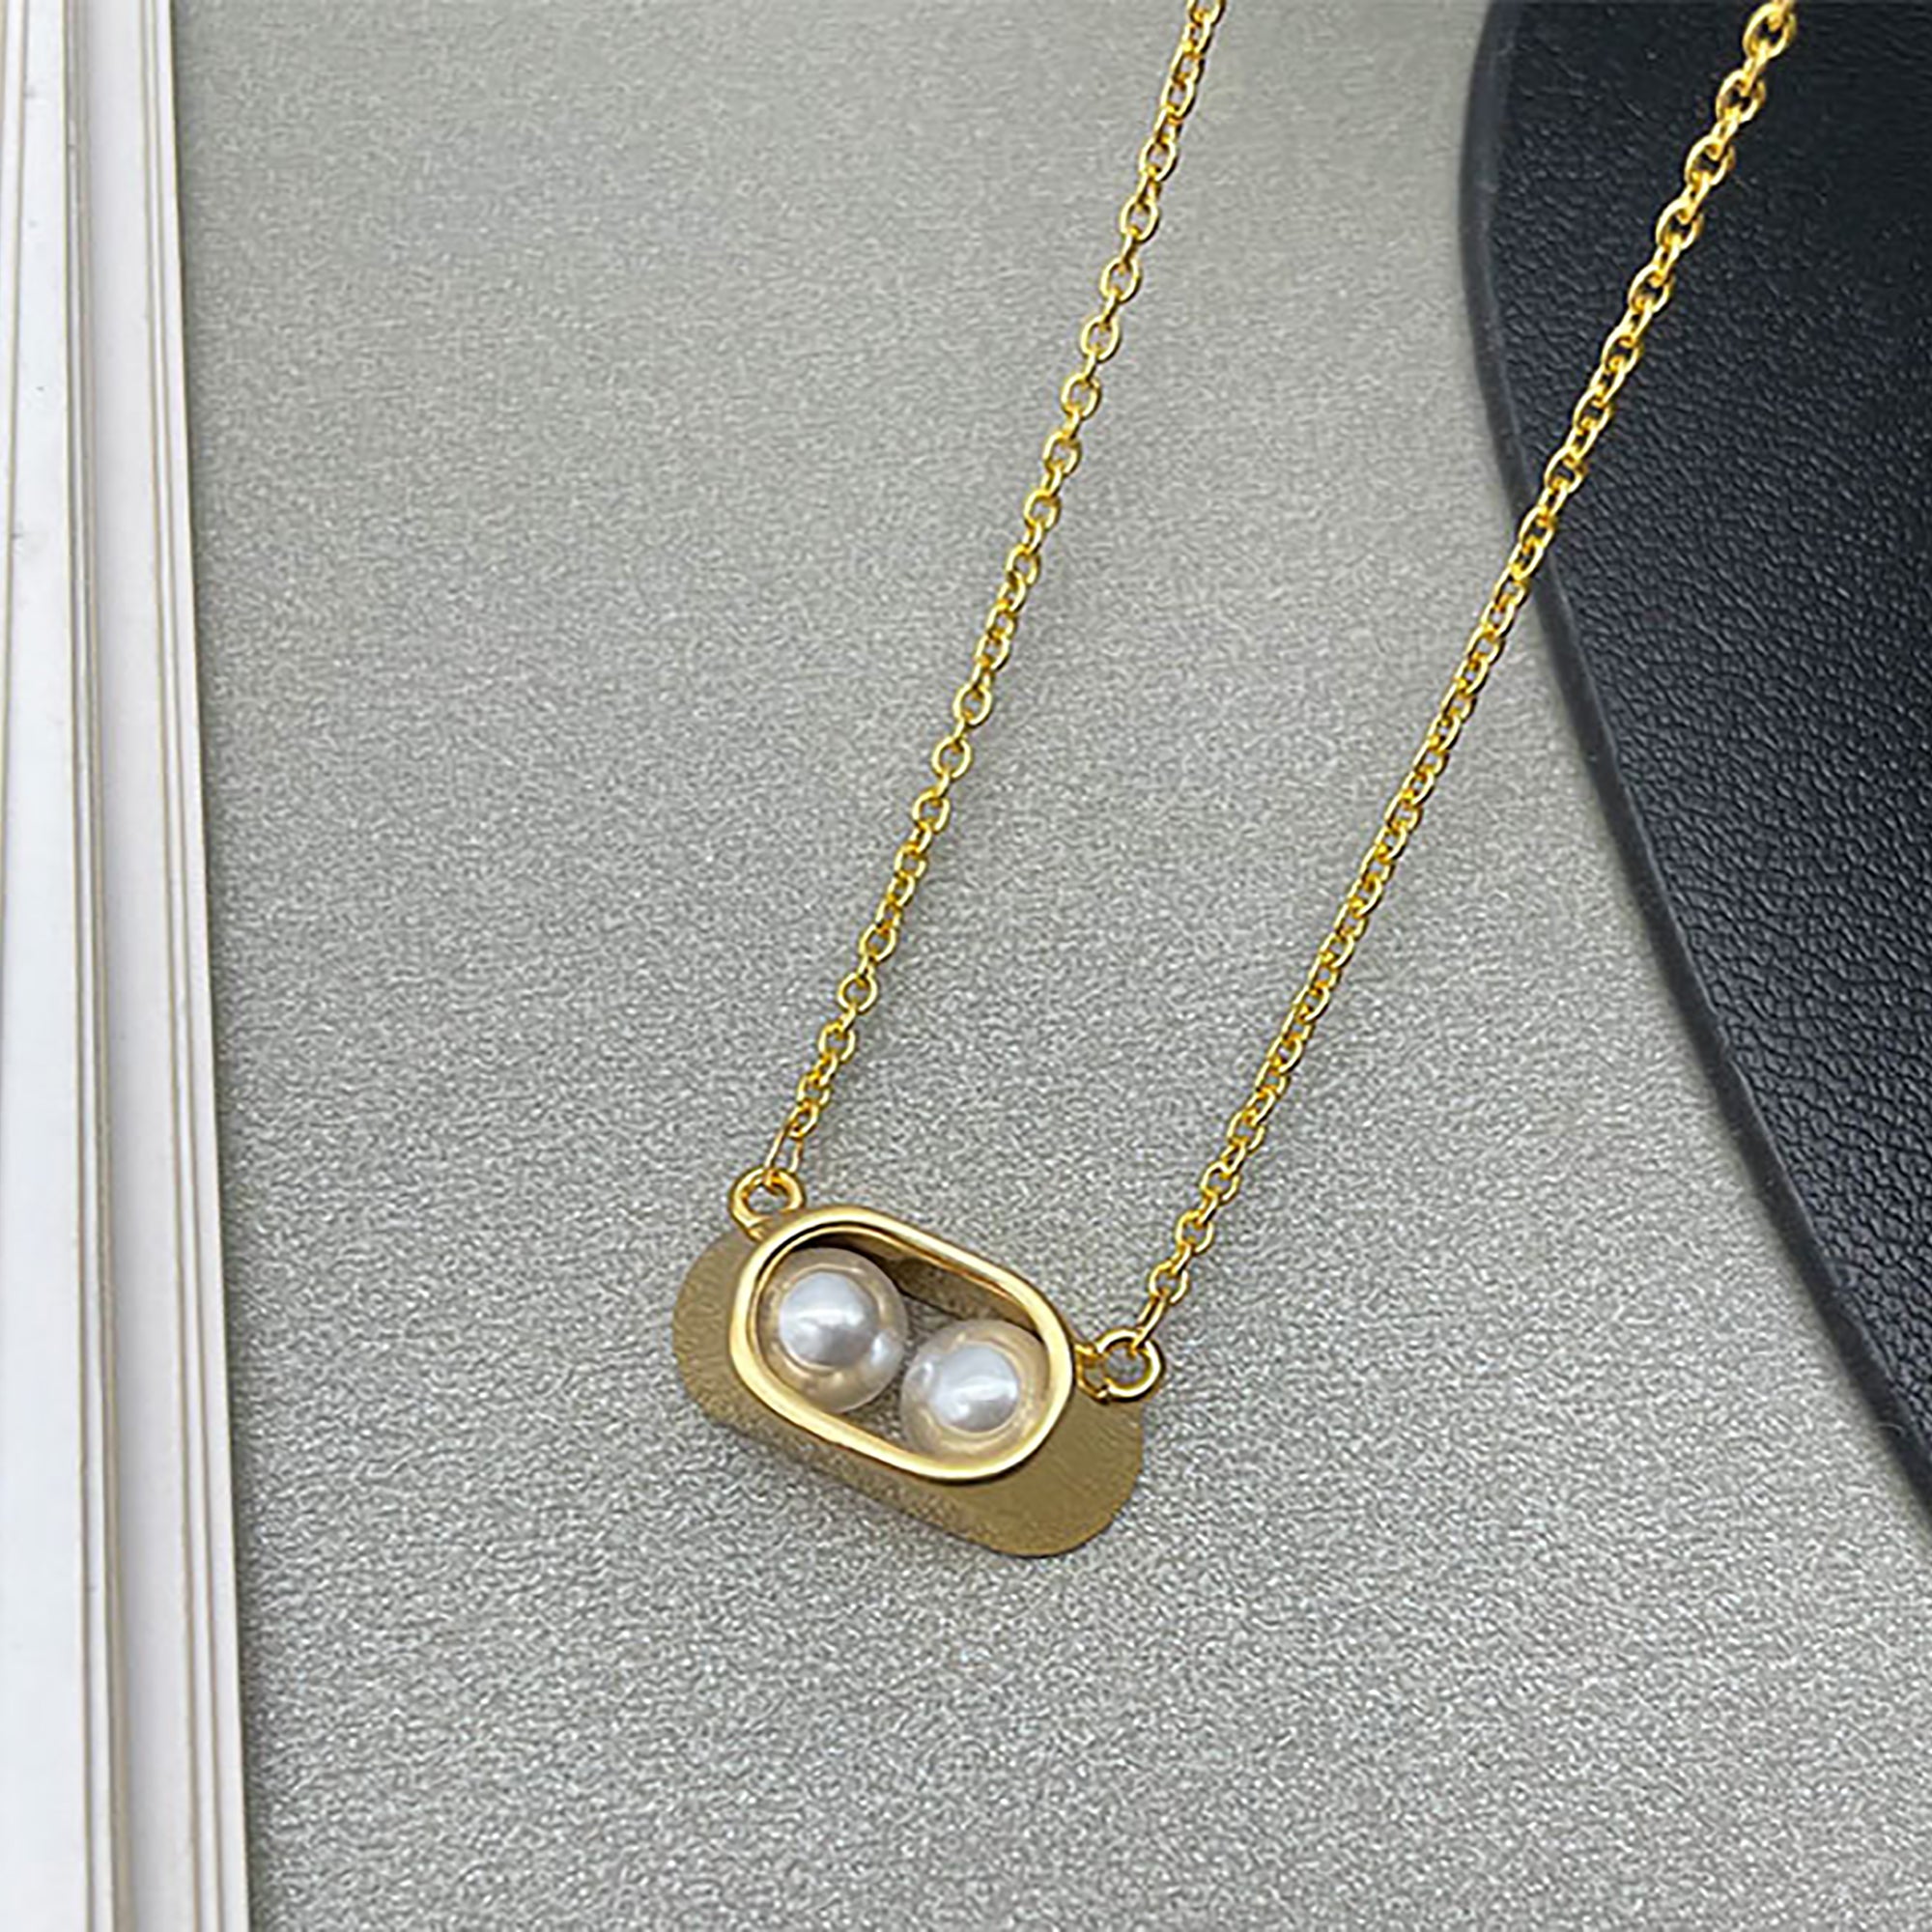 Gold Plated w/ Pearl Pendant Necklace Valentine Day Gift